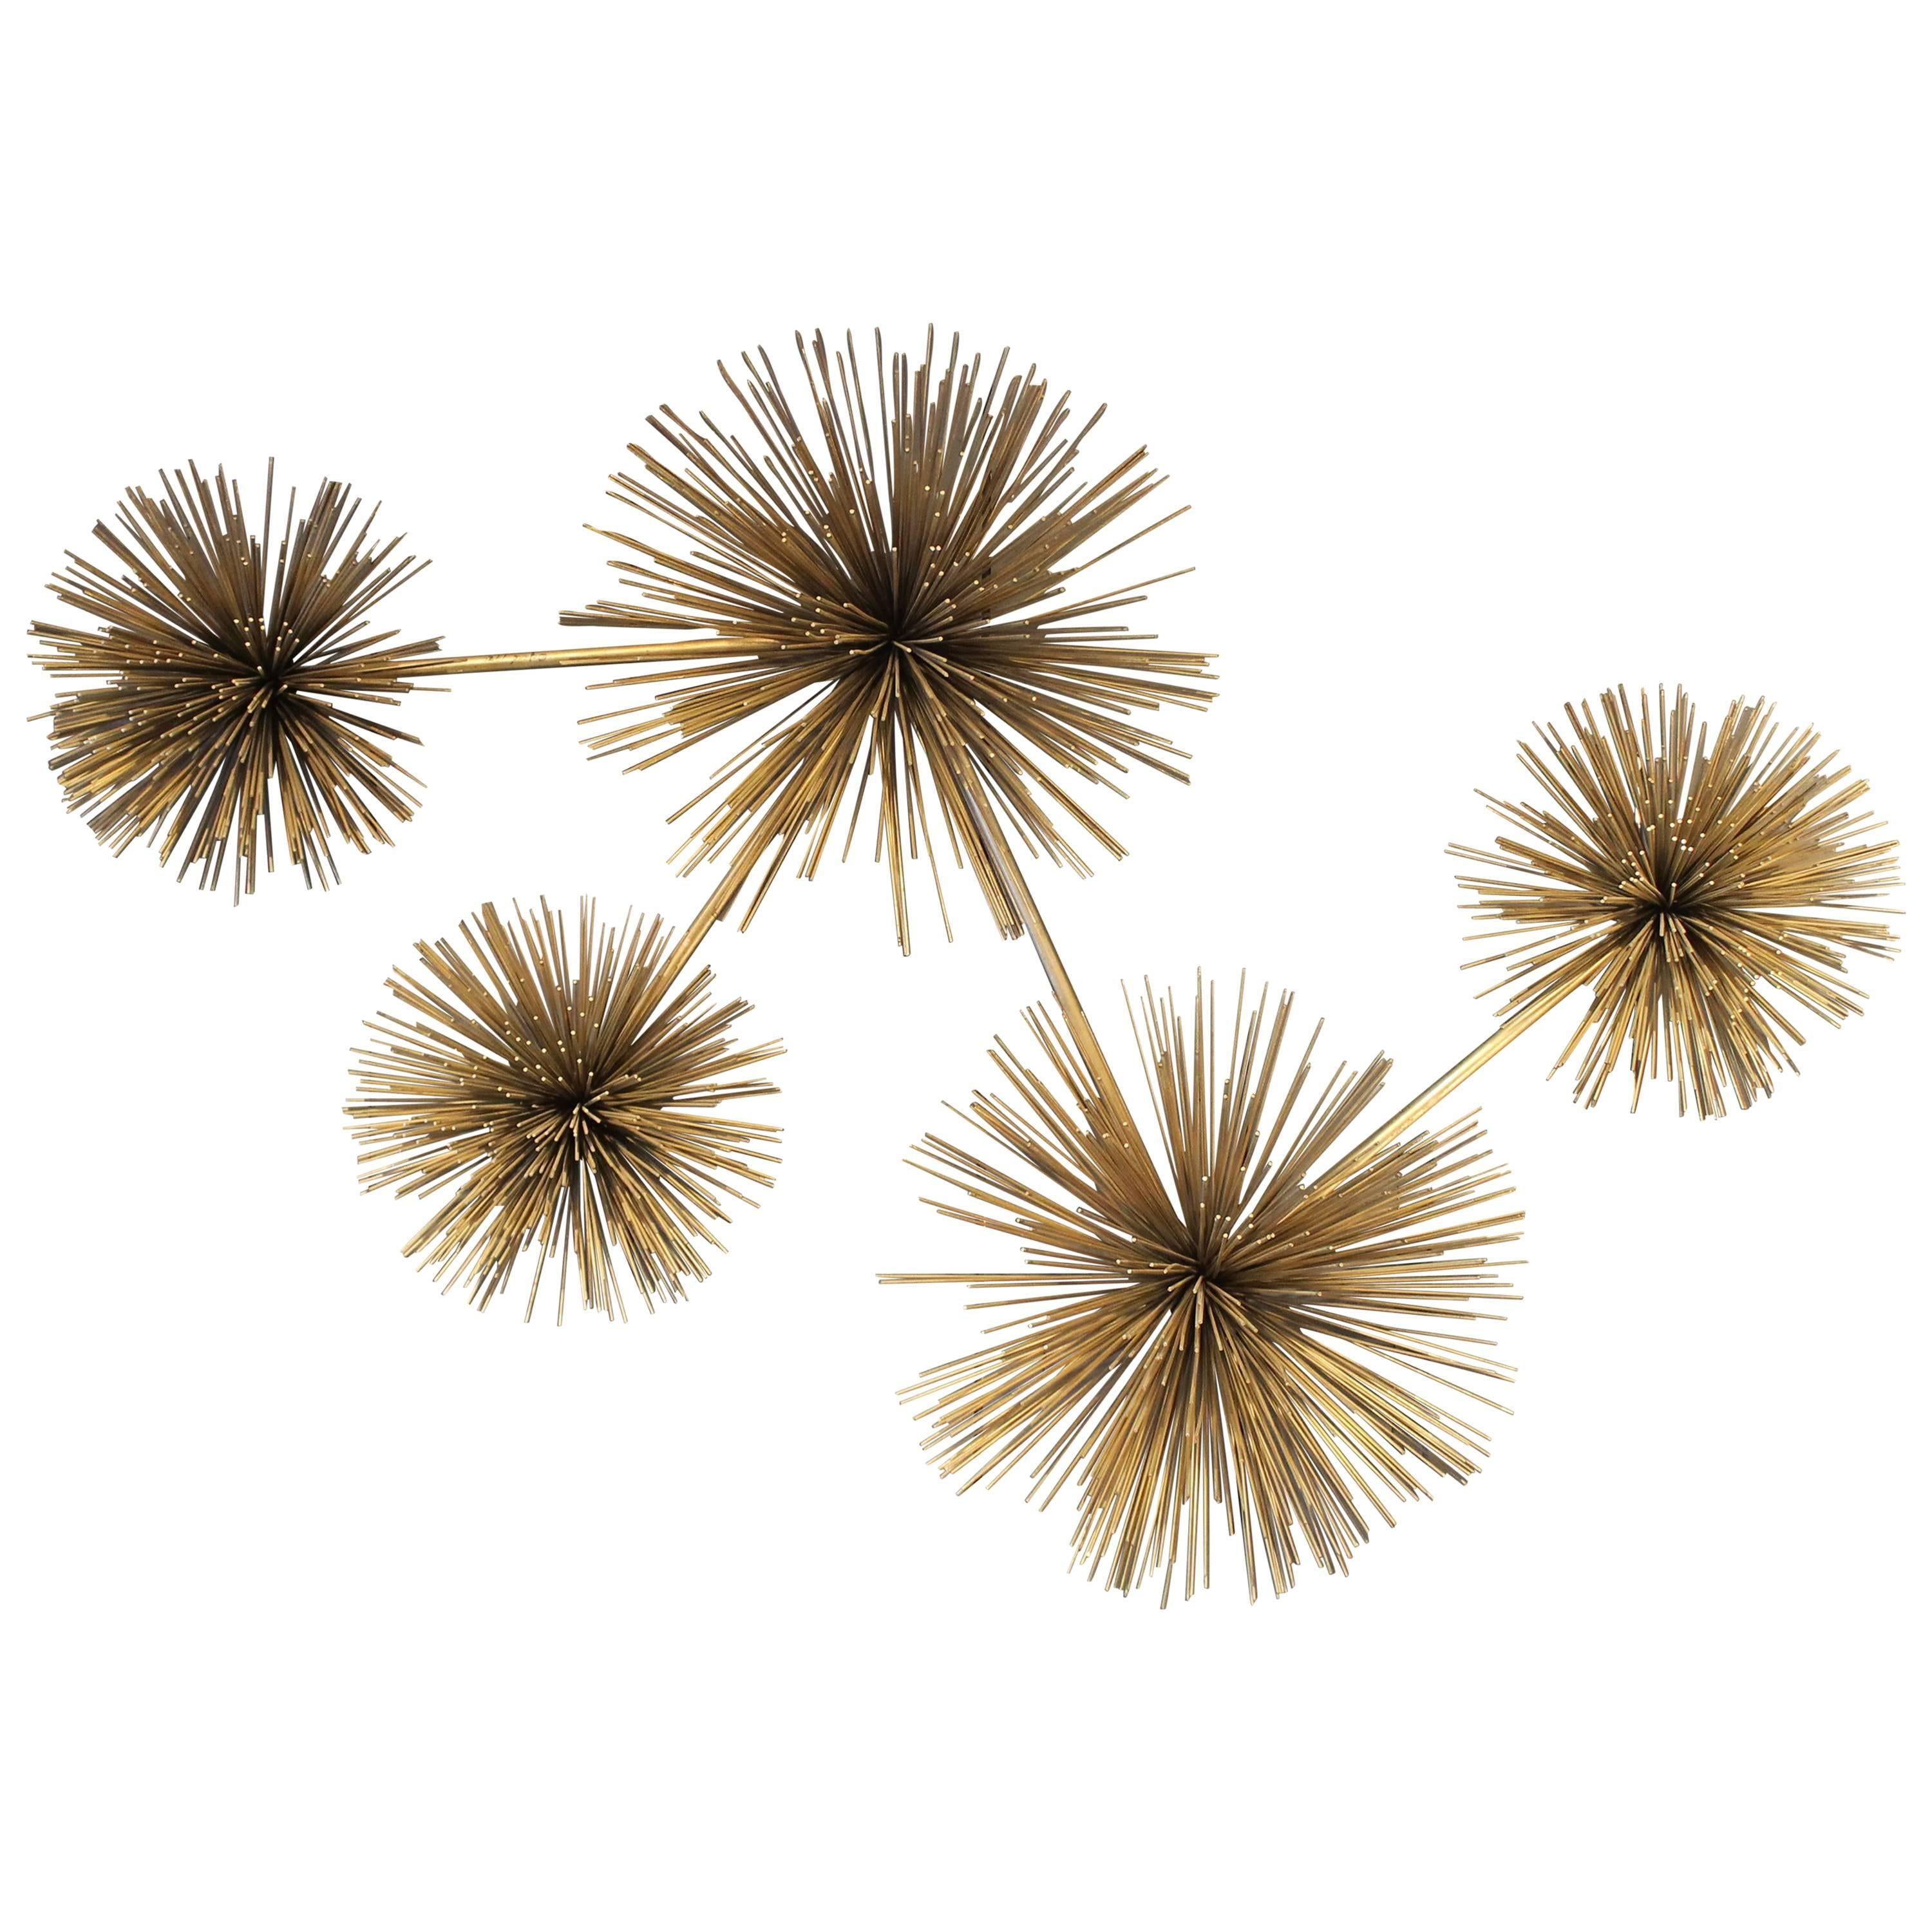 Curtis Jere Sea Urchin Wall Sculpture For Sale